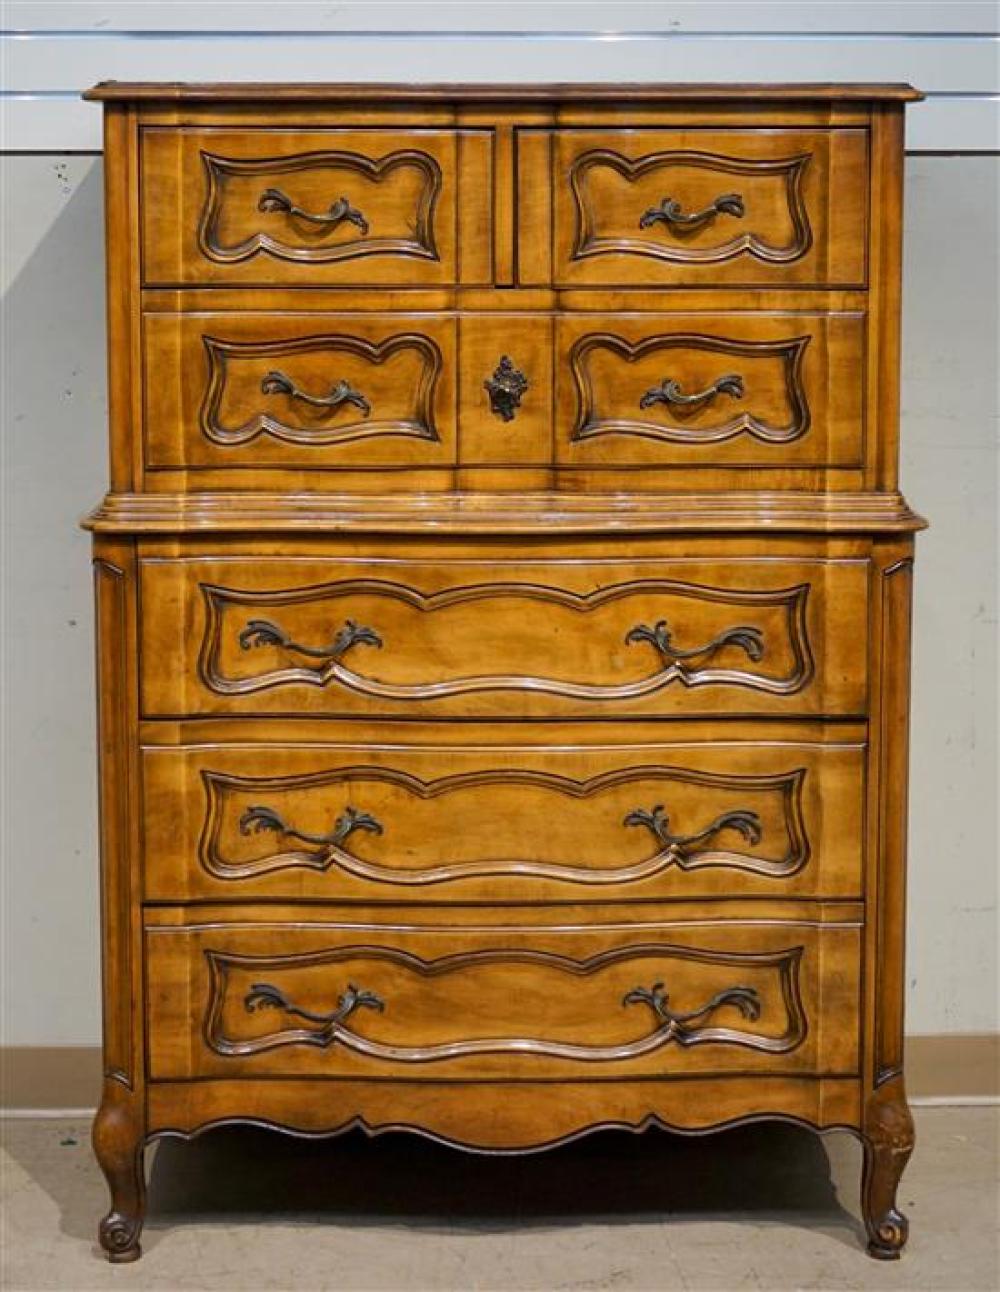 PROVINCIAL STYLE FRUITWOOD CHEST